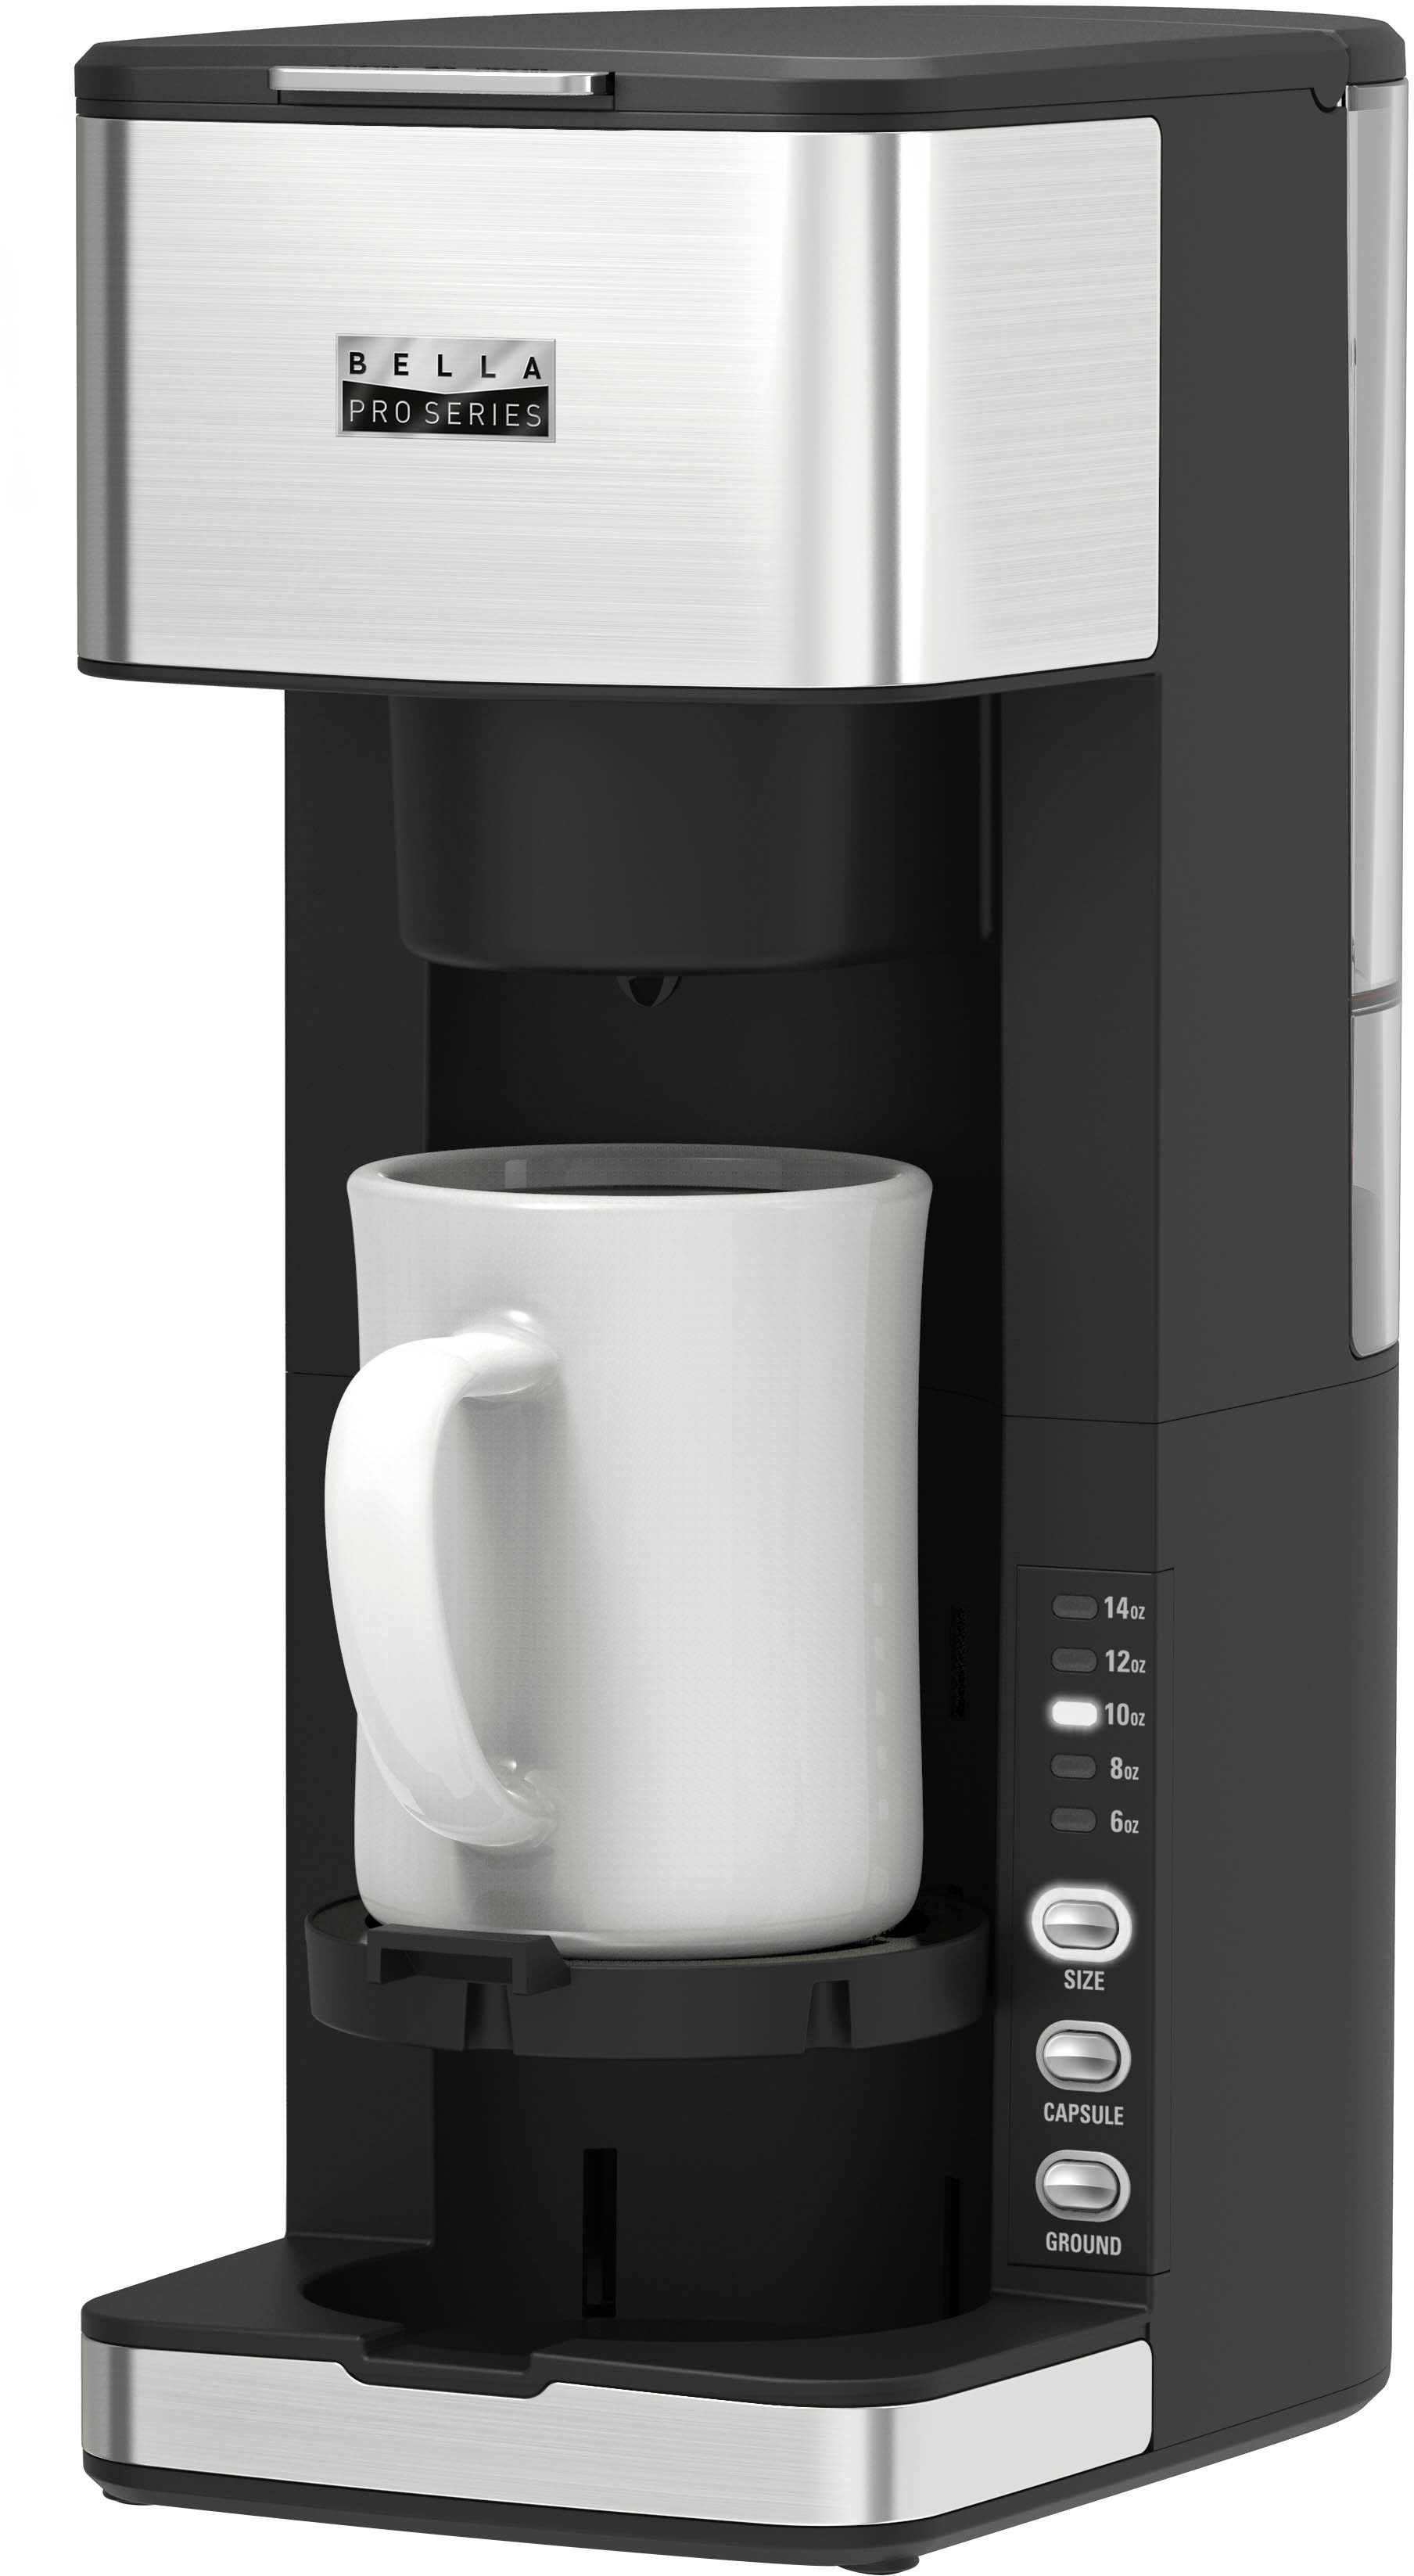 Bella's regularly $80 Dual Brew Coffee Maker with 40-ounce reservoir now  just $39 at